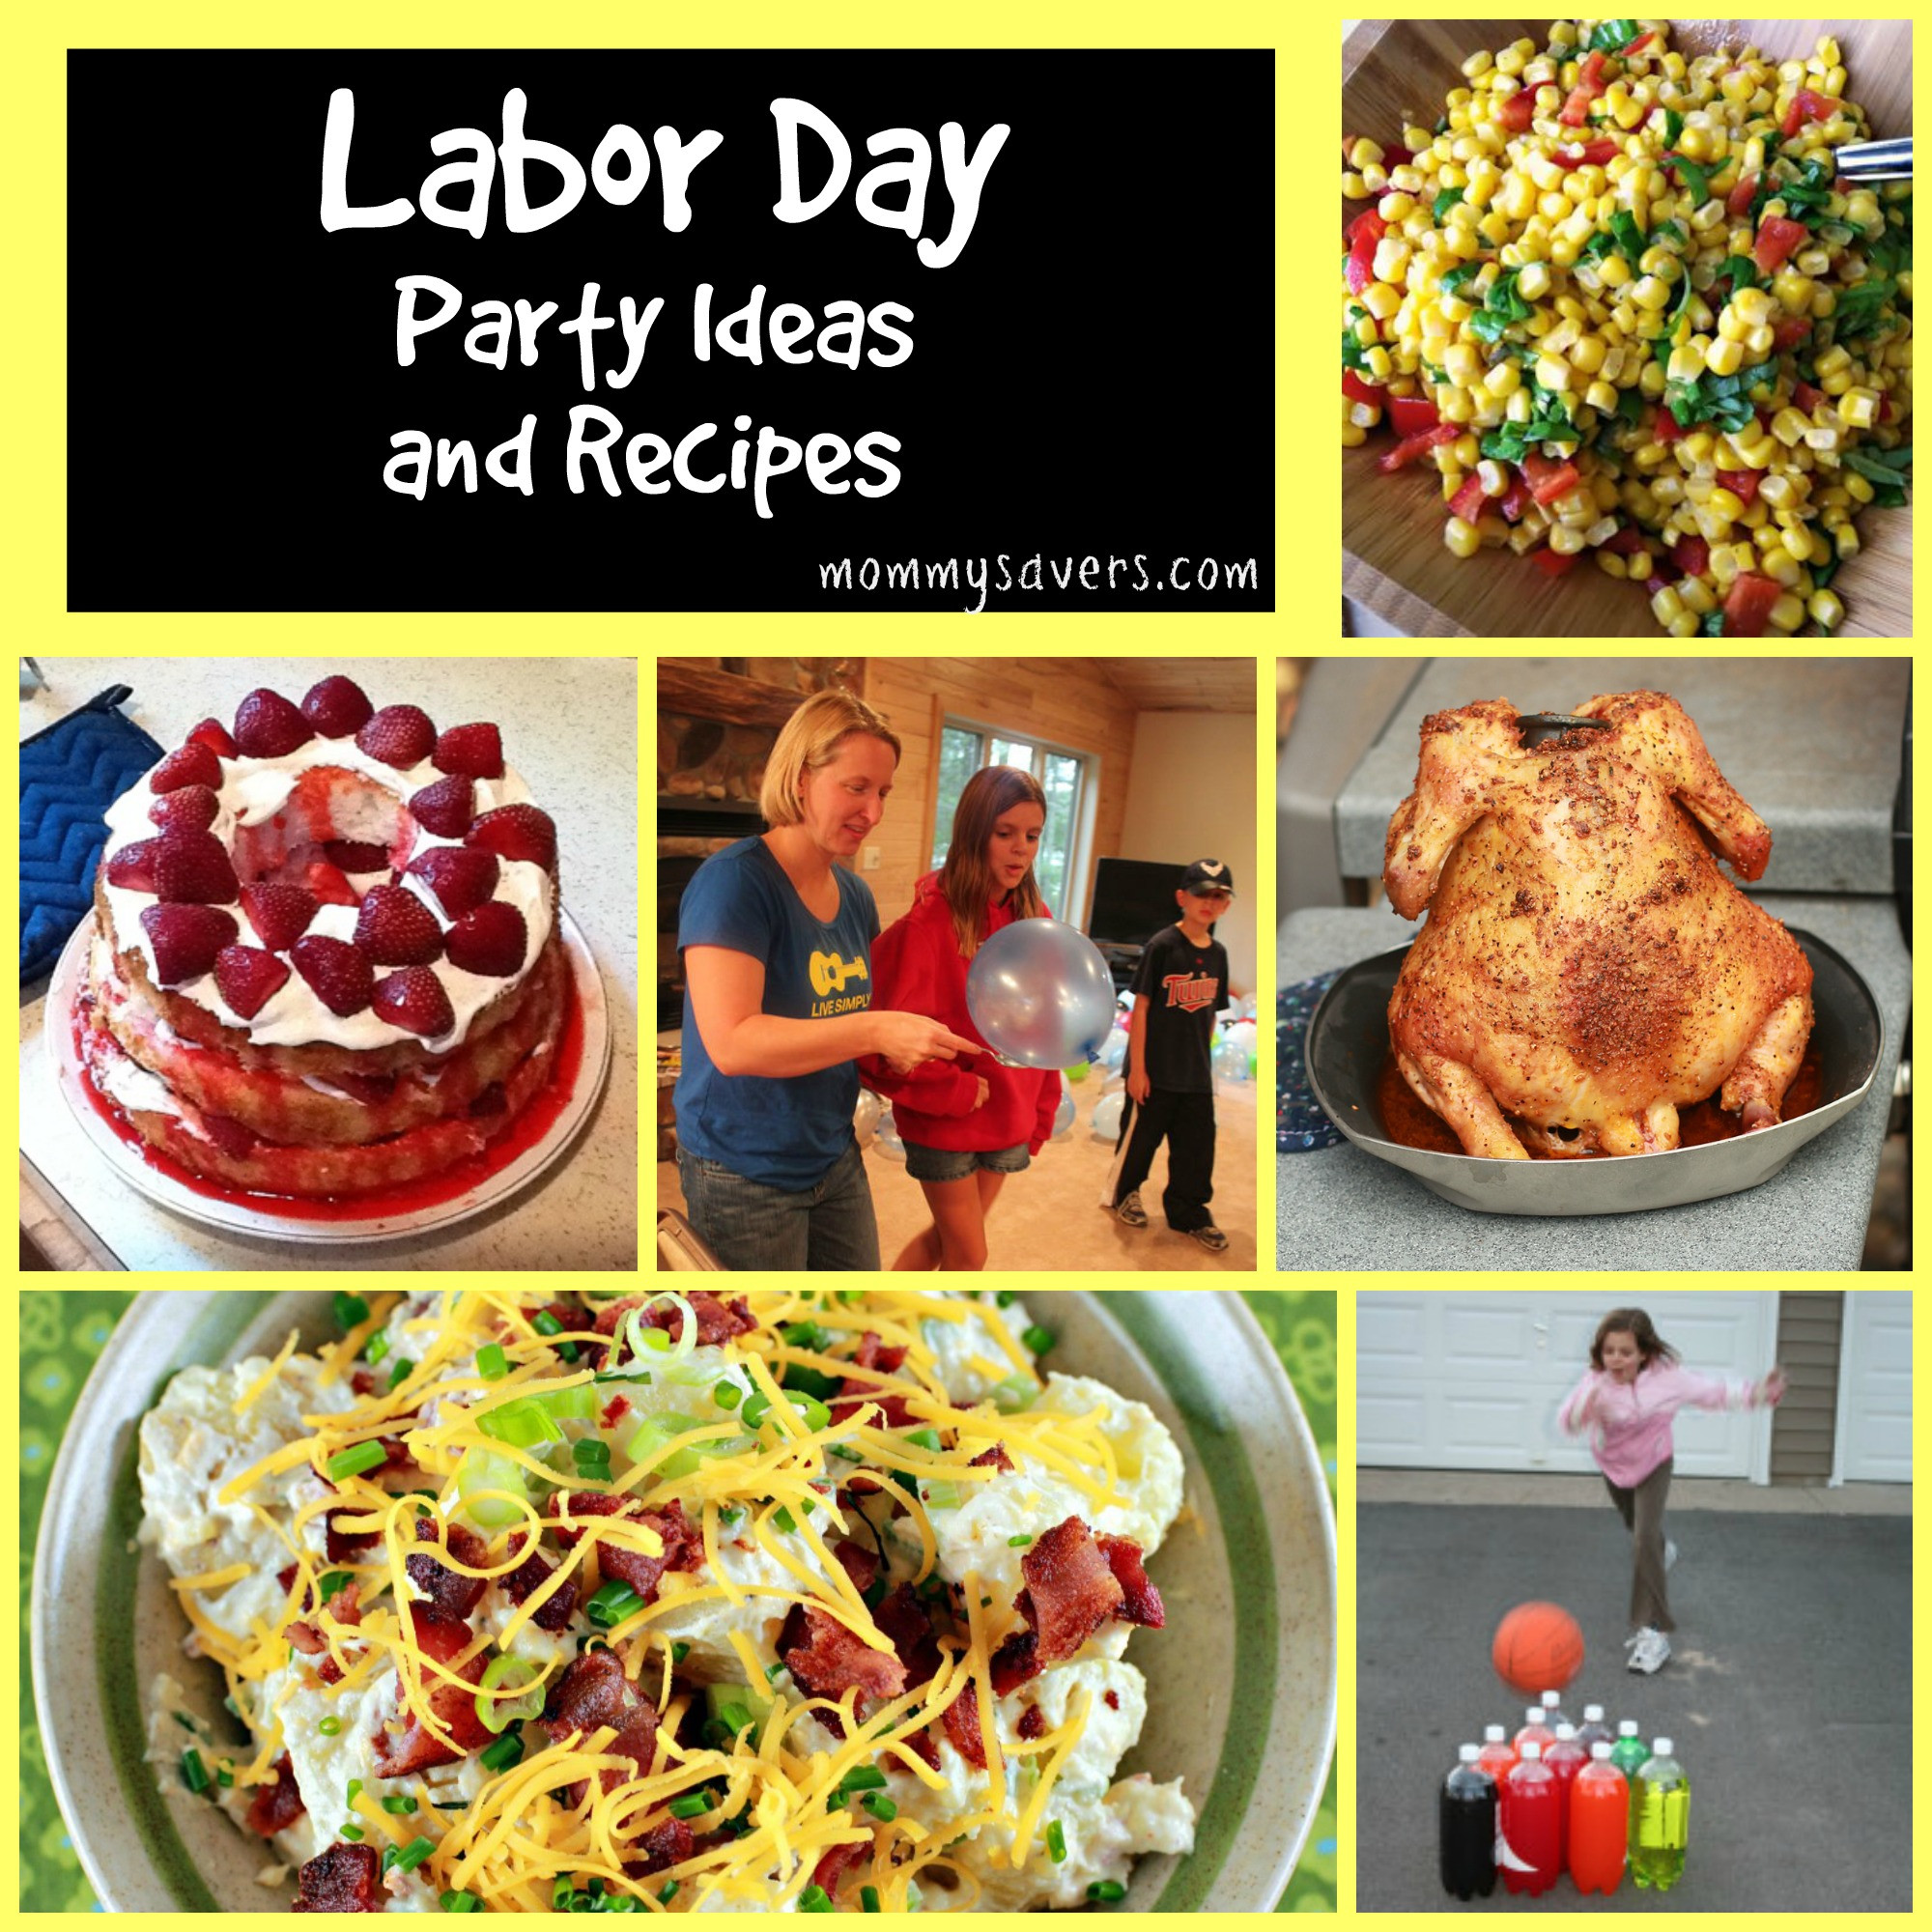 Labor Day Party Idea
 Labor Day Party Ideas and 25 Recipes Mommysavers